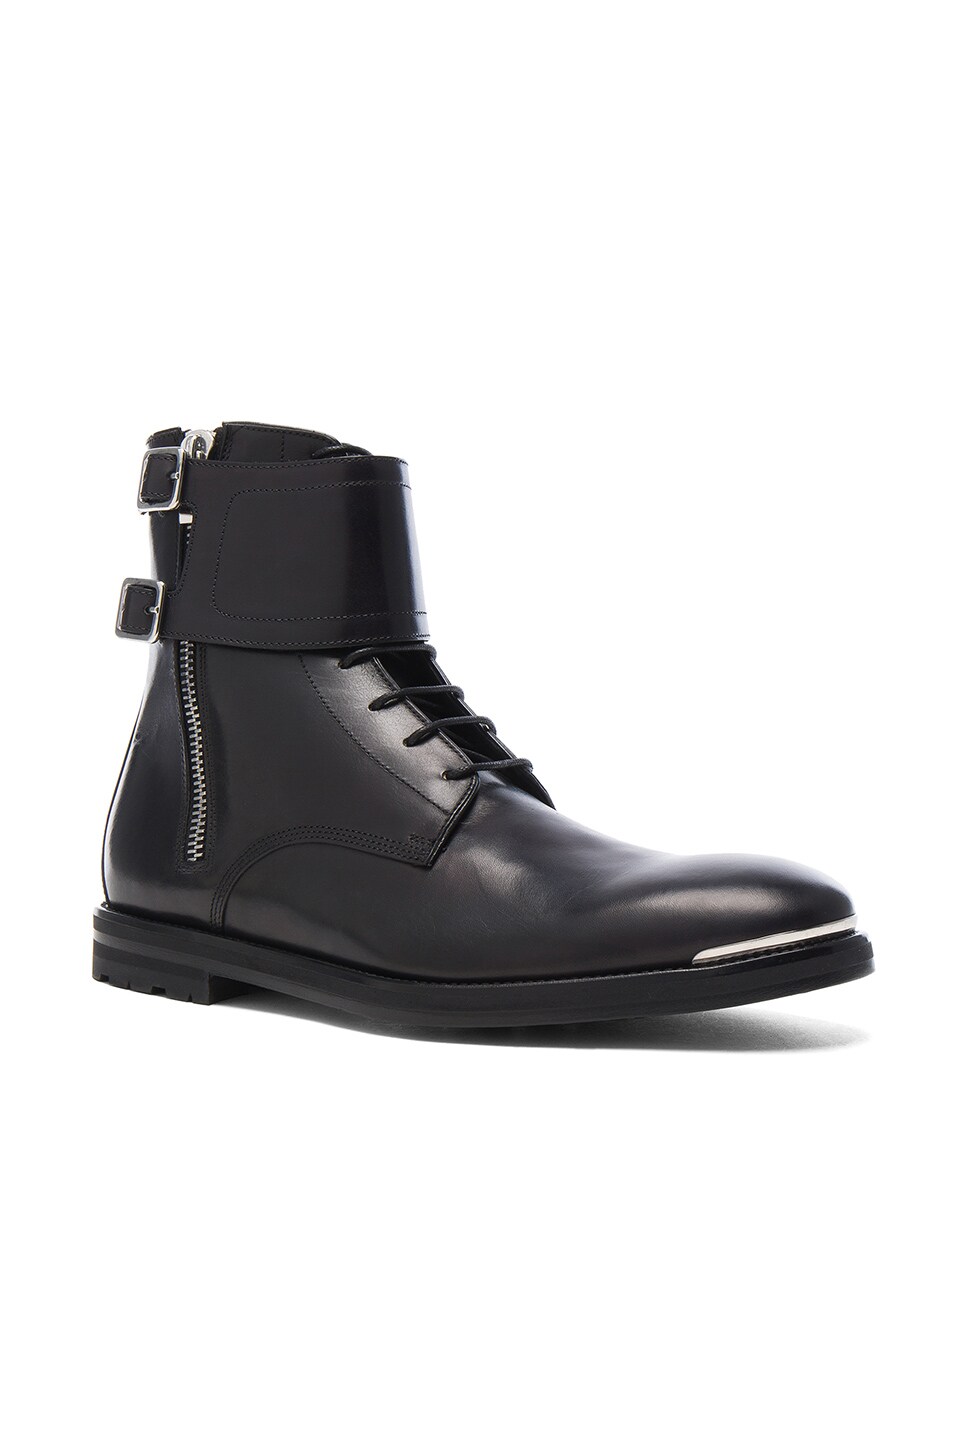 Image 1 of Alexander McQueen Strap Leather Combat Boots in Black